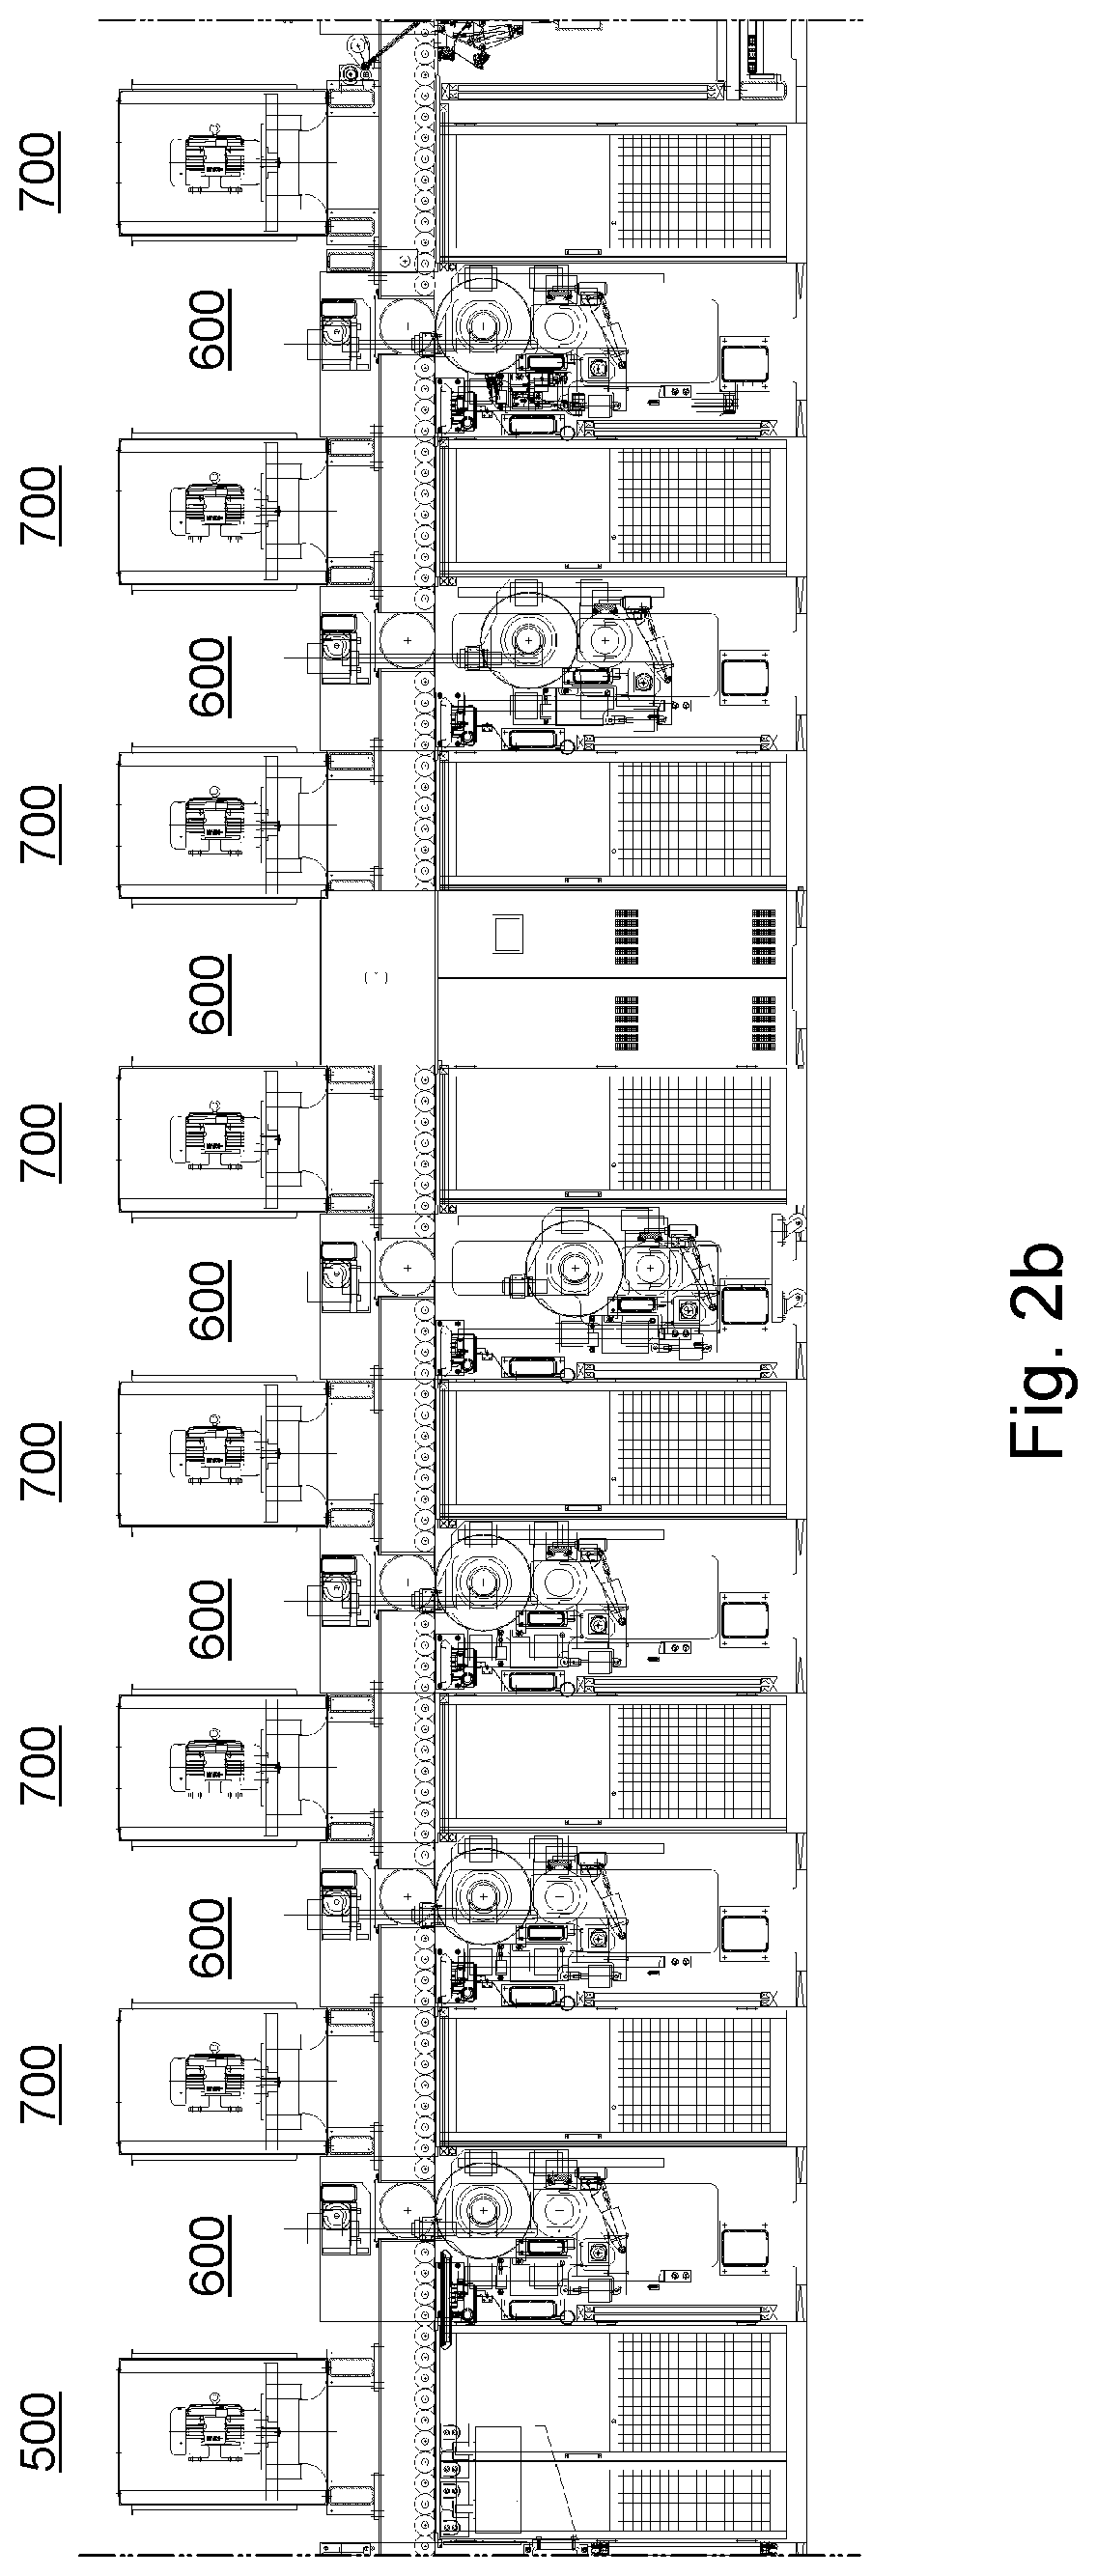 Method for operating a sheet-processing machine, and sheet-processing machine